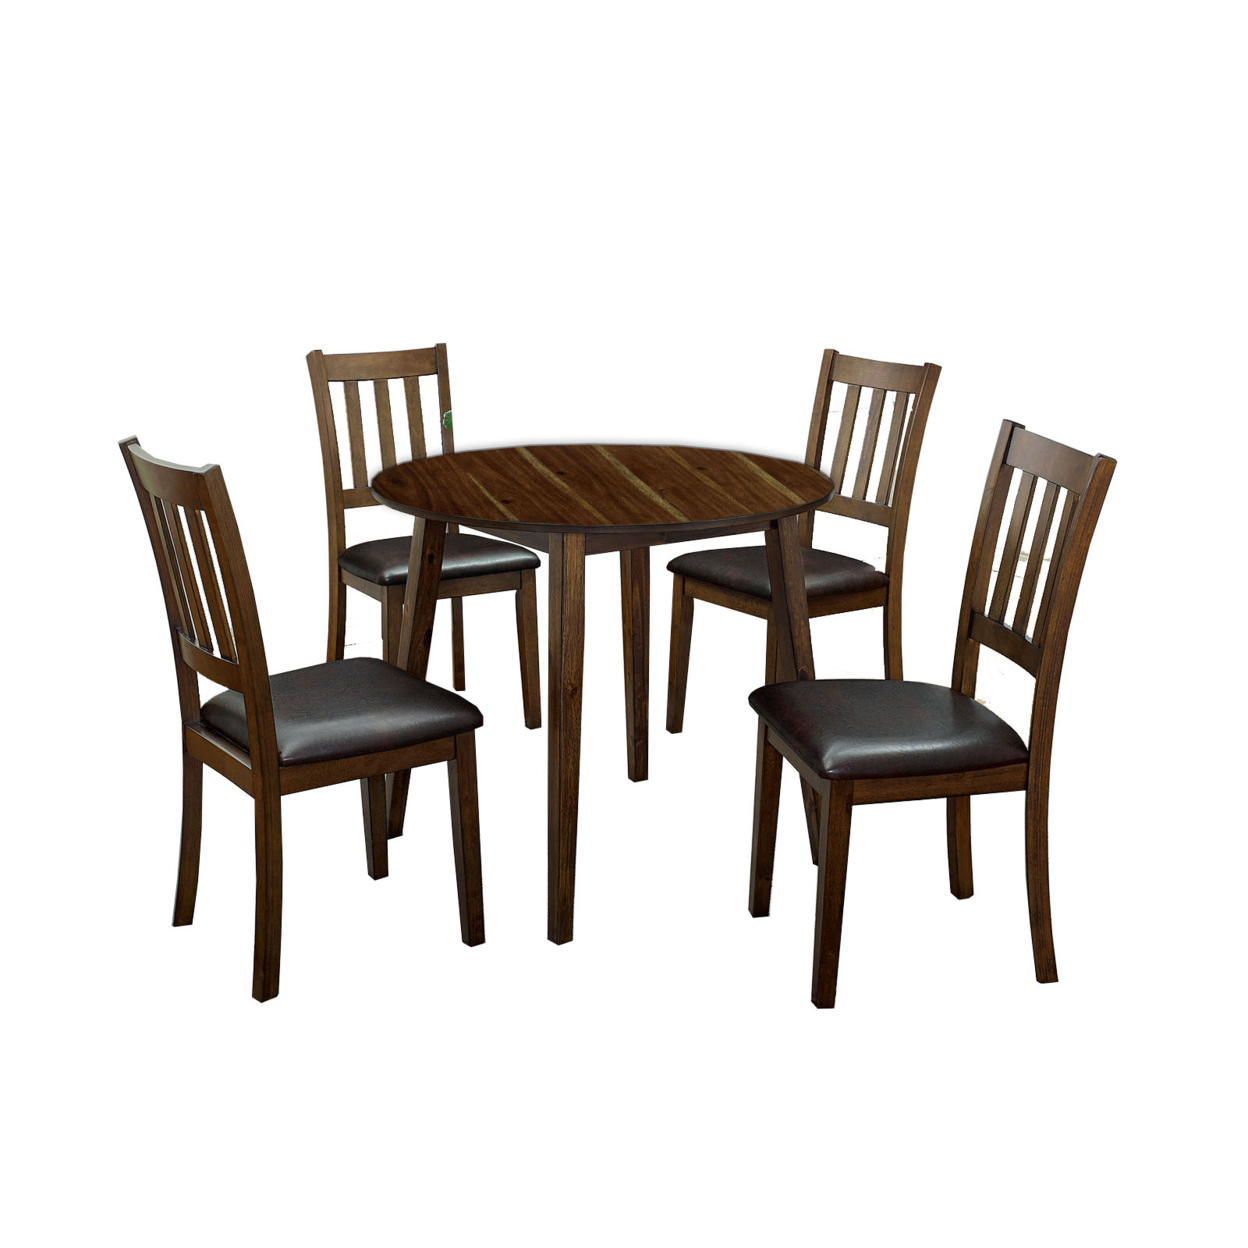 Saltoro Sherpi Wooden Dining Table with Ladder Back Style Chairs, Set of 5, Brown